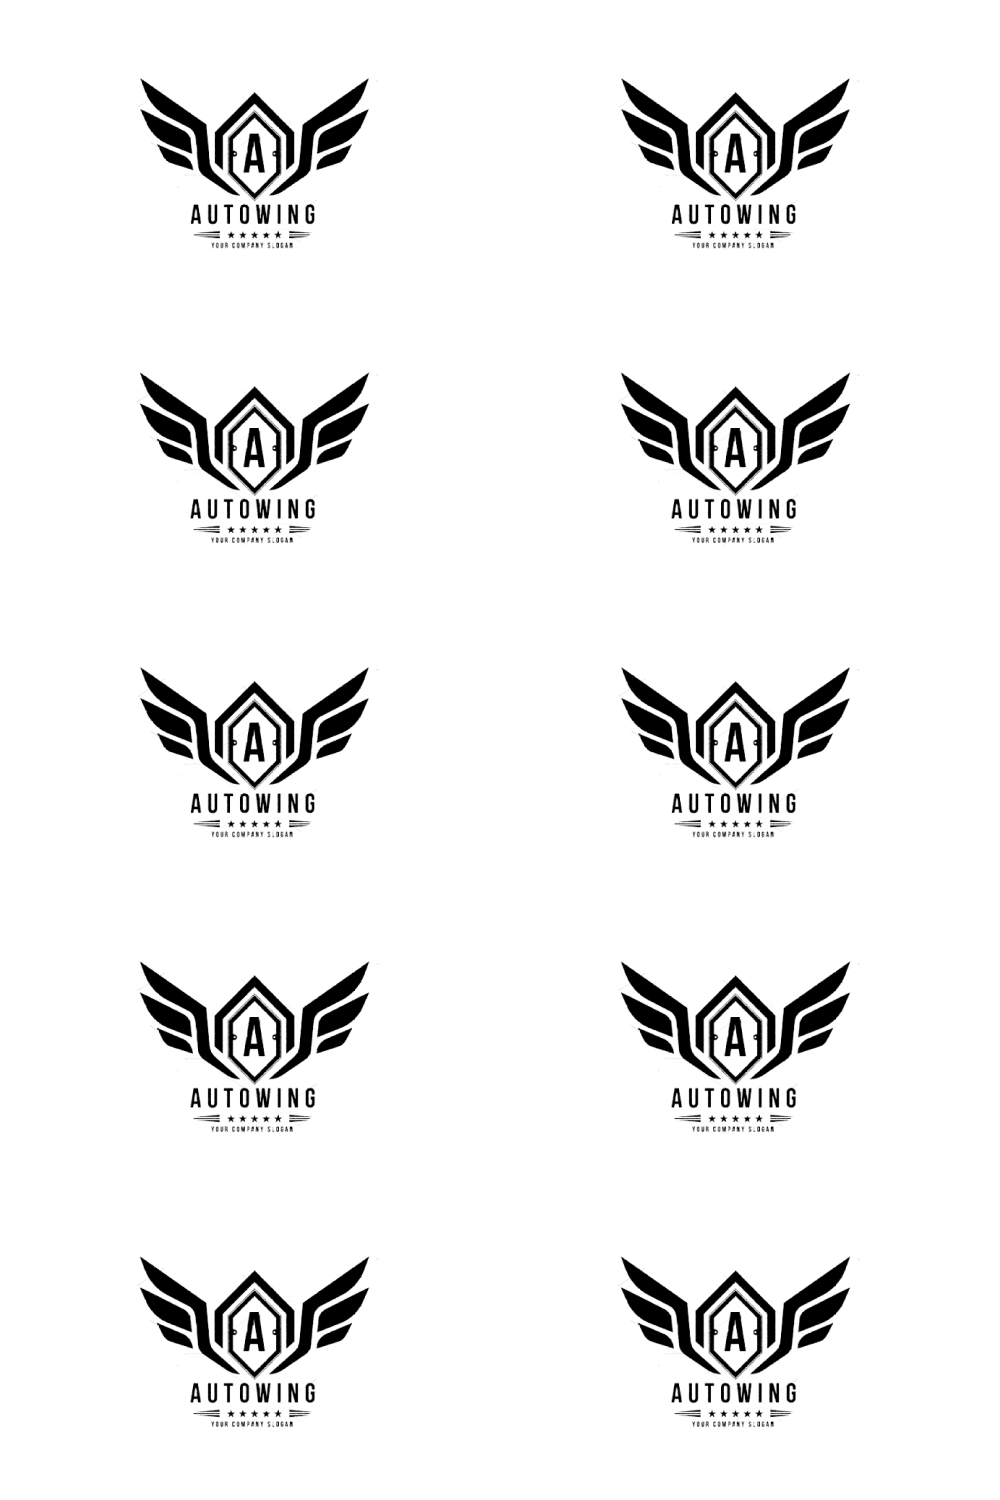 Stitches of different logos.